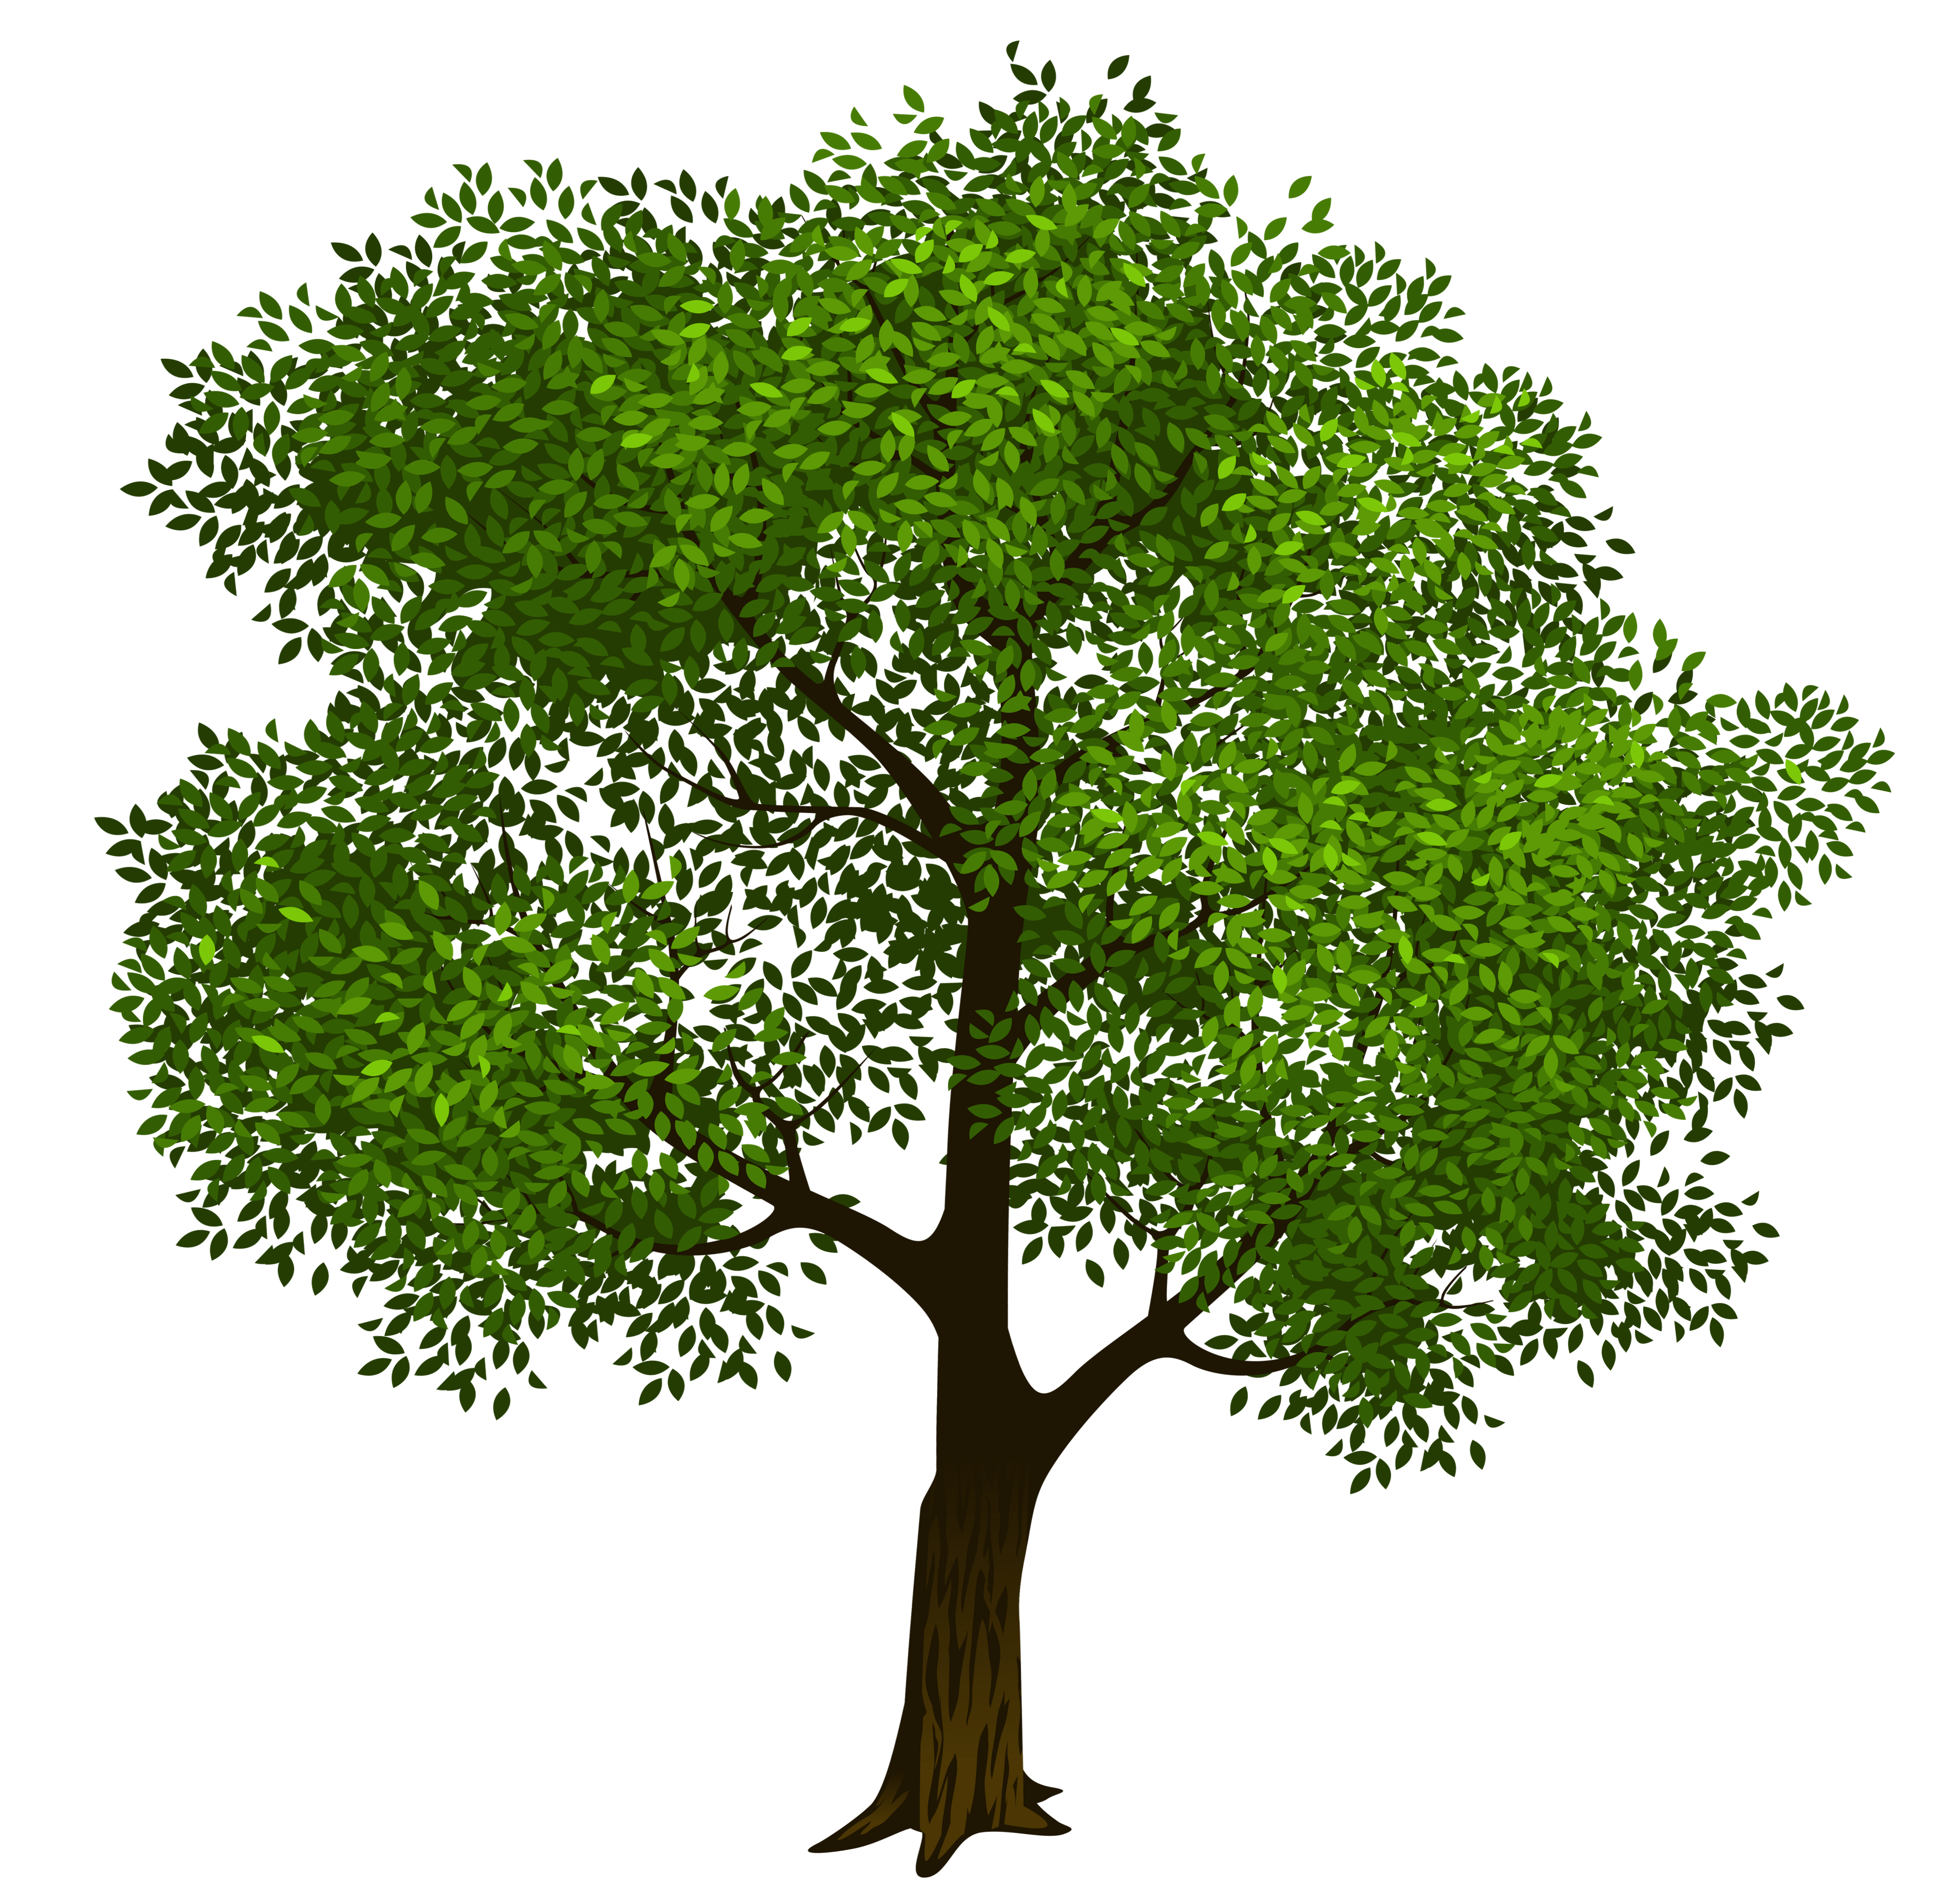 Transparent Green Tree Clipart Picture?m=1423128566 